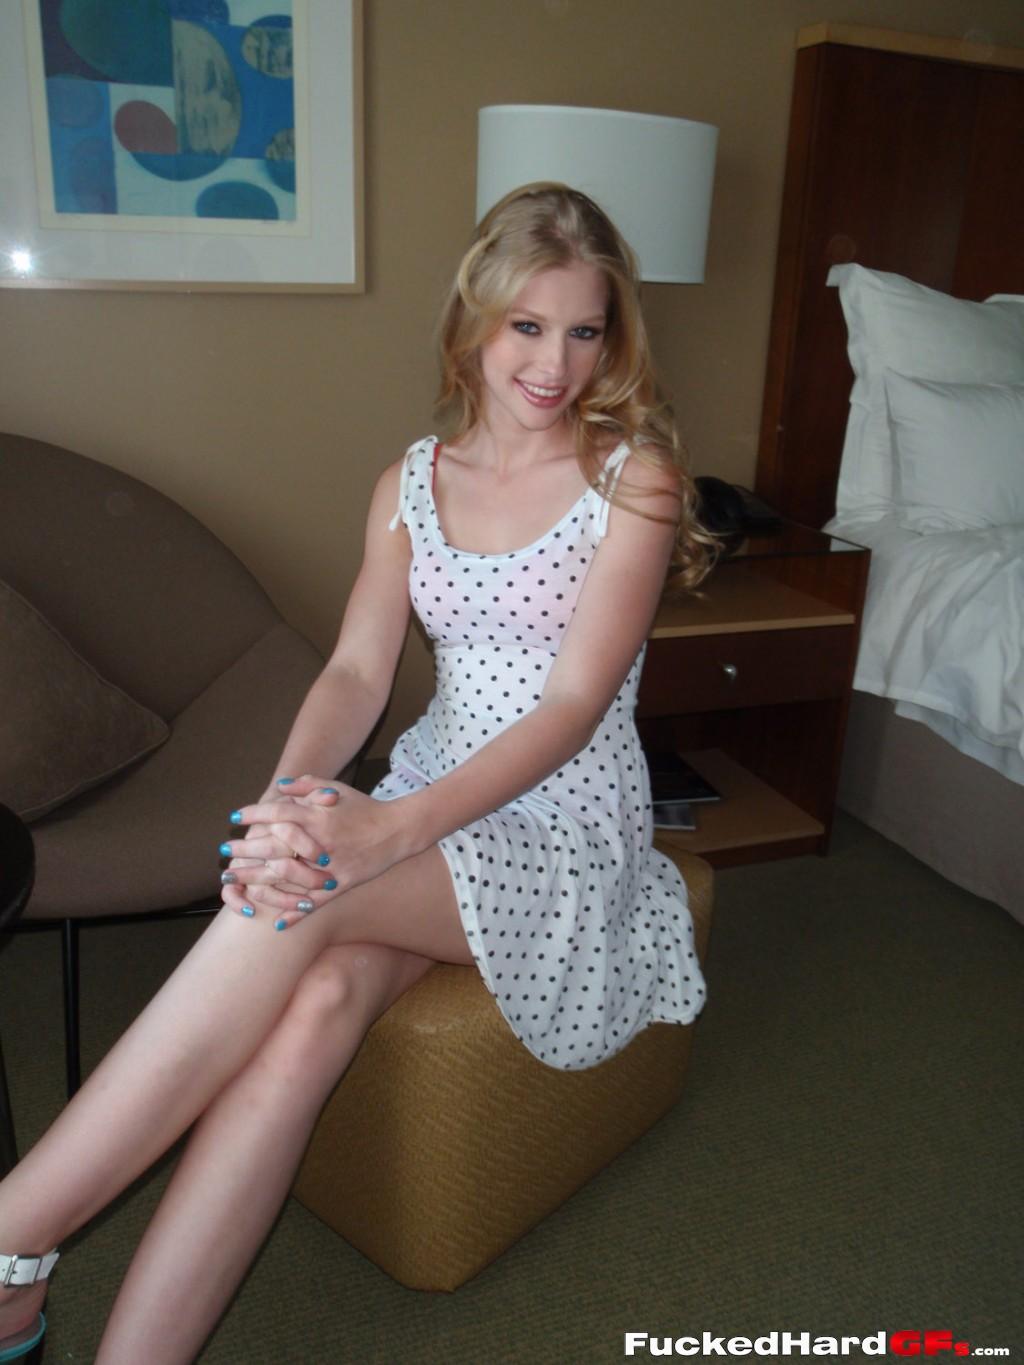 Avril is the pefect blonde bombshell girlfriend that can't get enough of her ex-boyfriend. Watch her suck and fuck him in her hotel room! #53389861